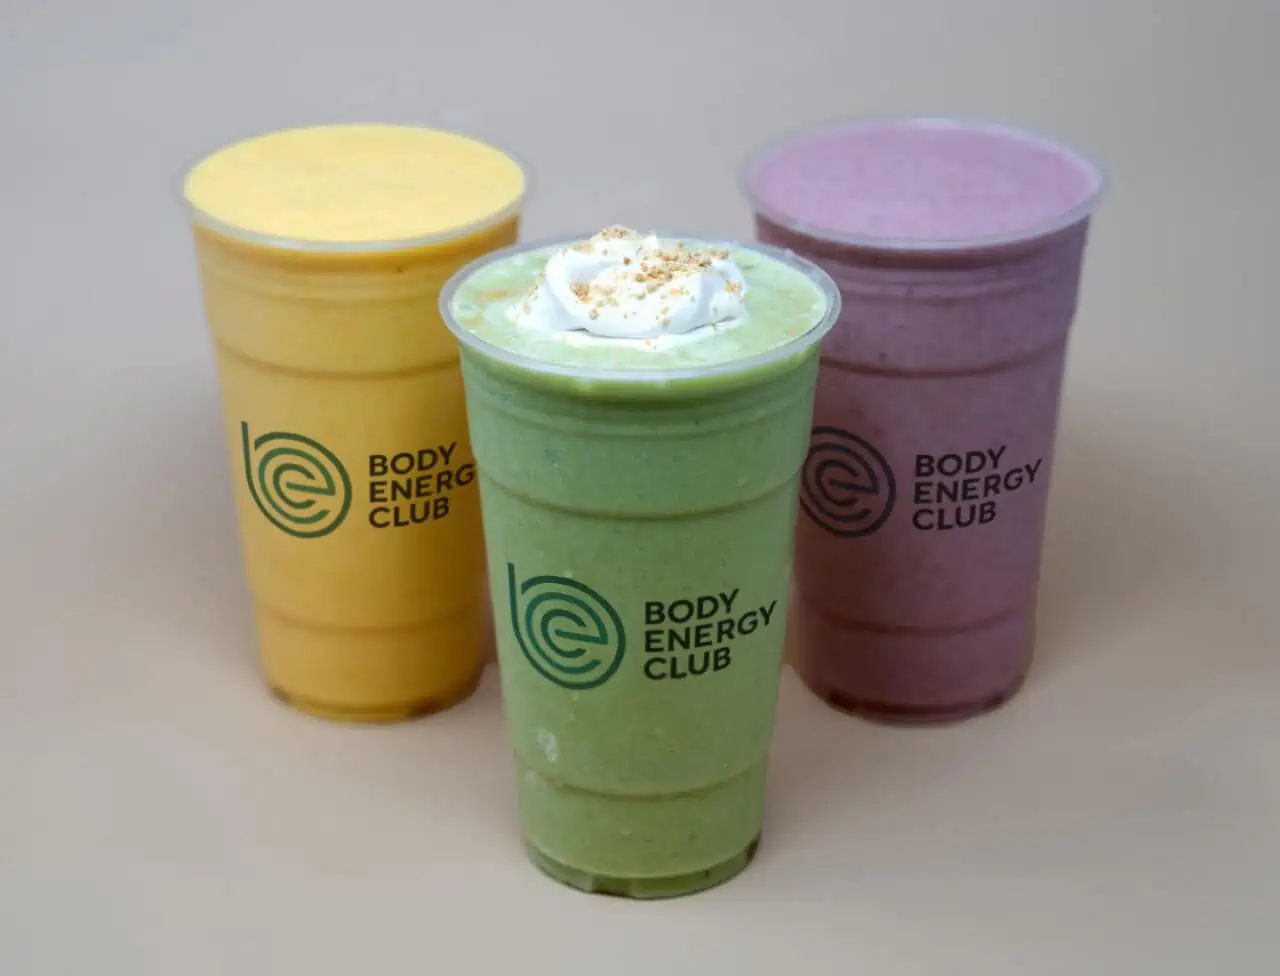 Displaying three smoothies, the Green Goddess, Banana Berry Blast, and Berry Delicious.